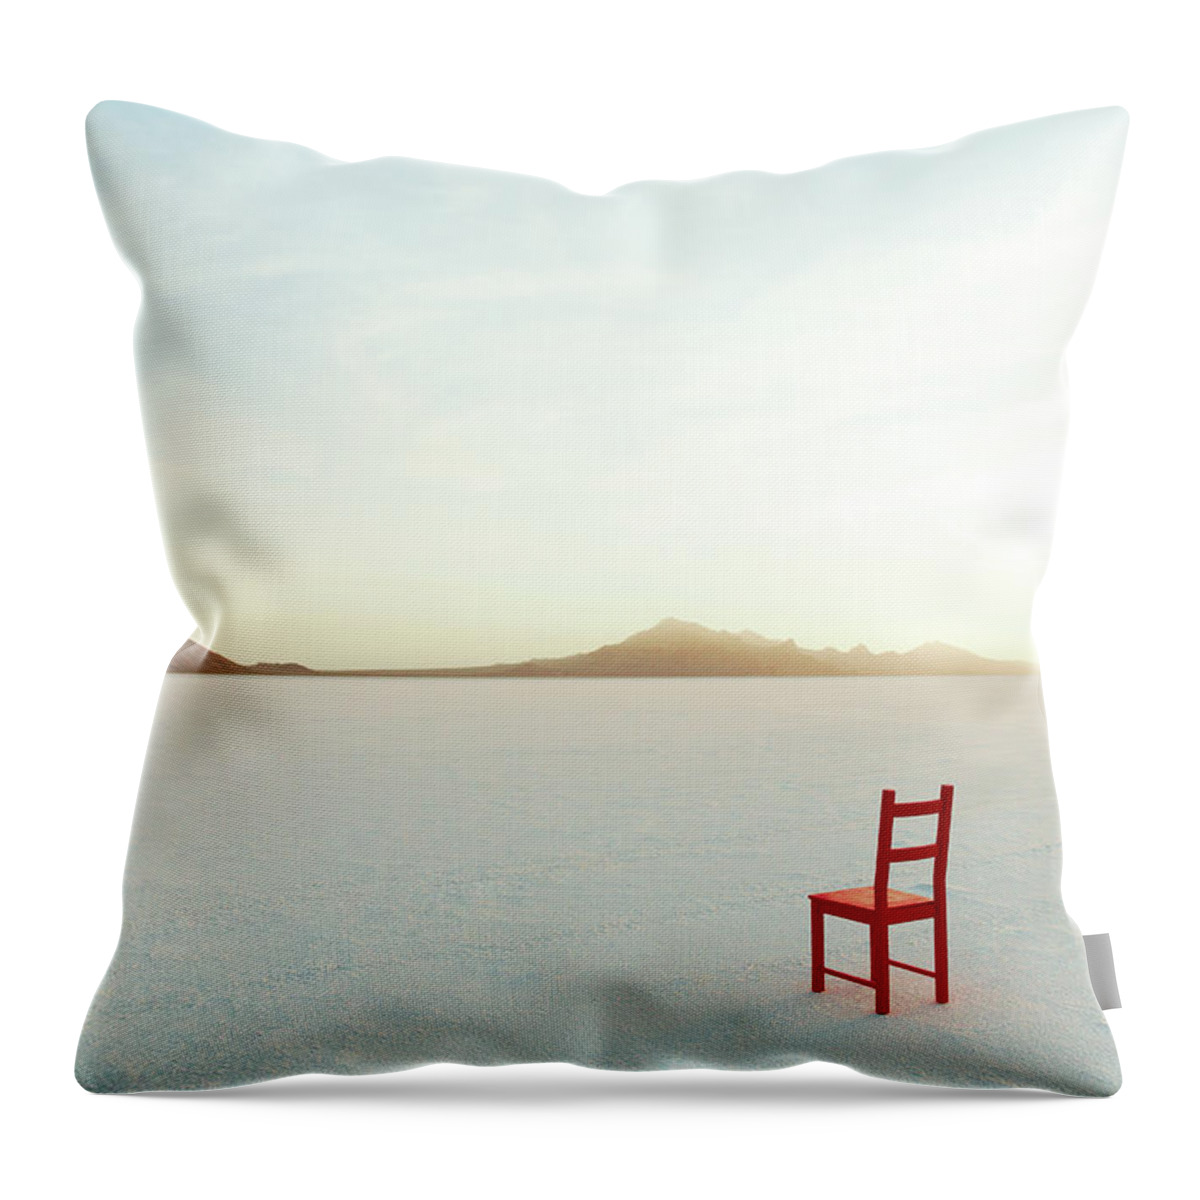 Tranquility Throw Pillow featuring the photograph Red Chair On Salt Flats, Facing The by Andy Ryan